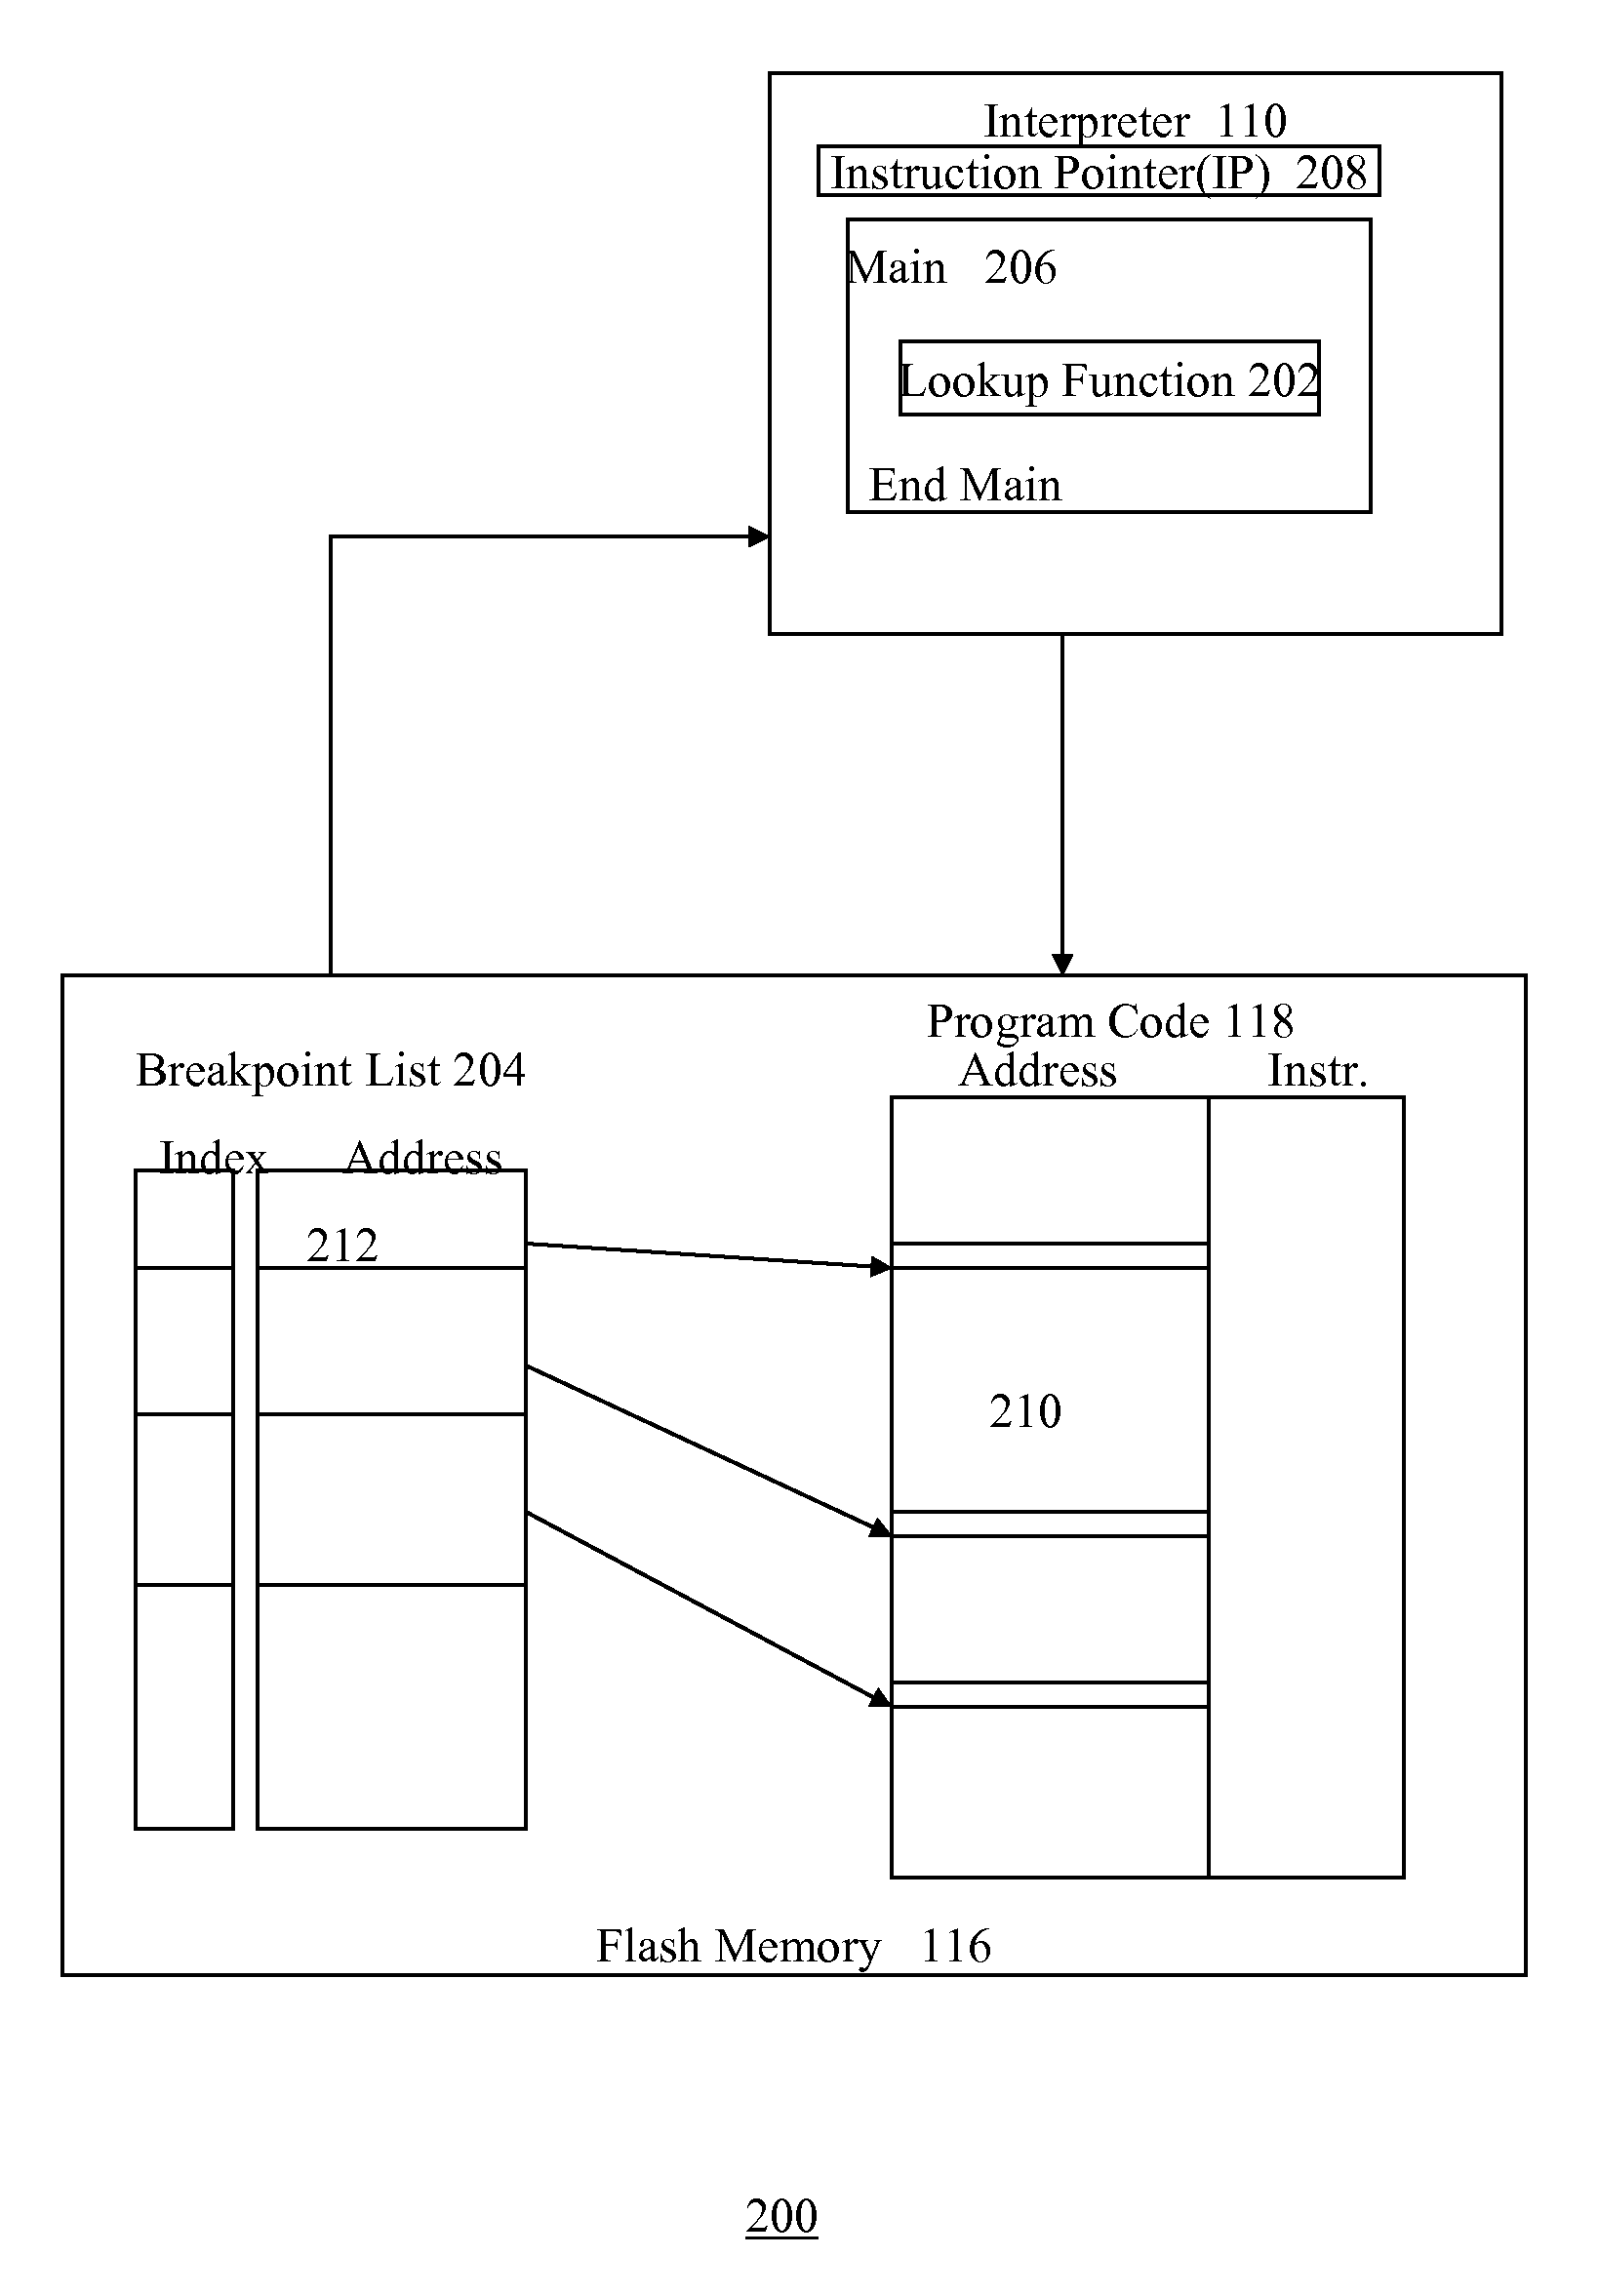 System and method for implementing software breakpoints in an interpreter